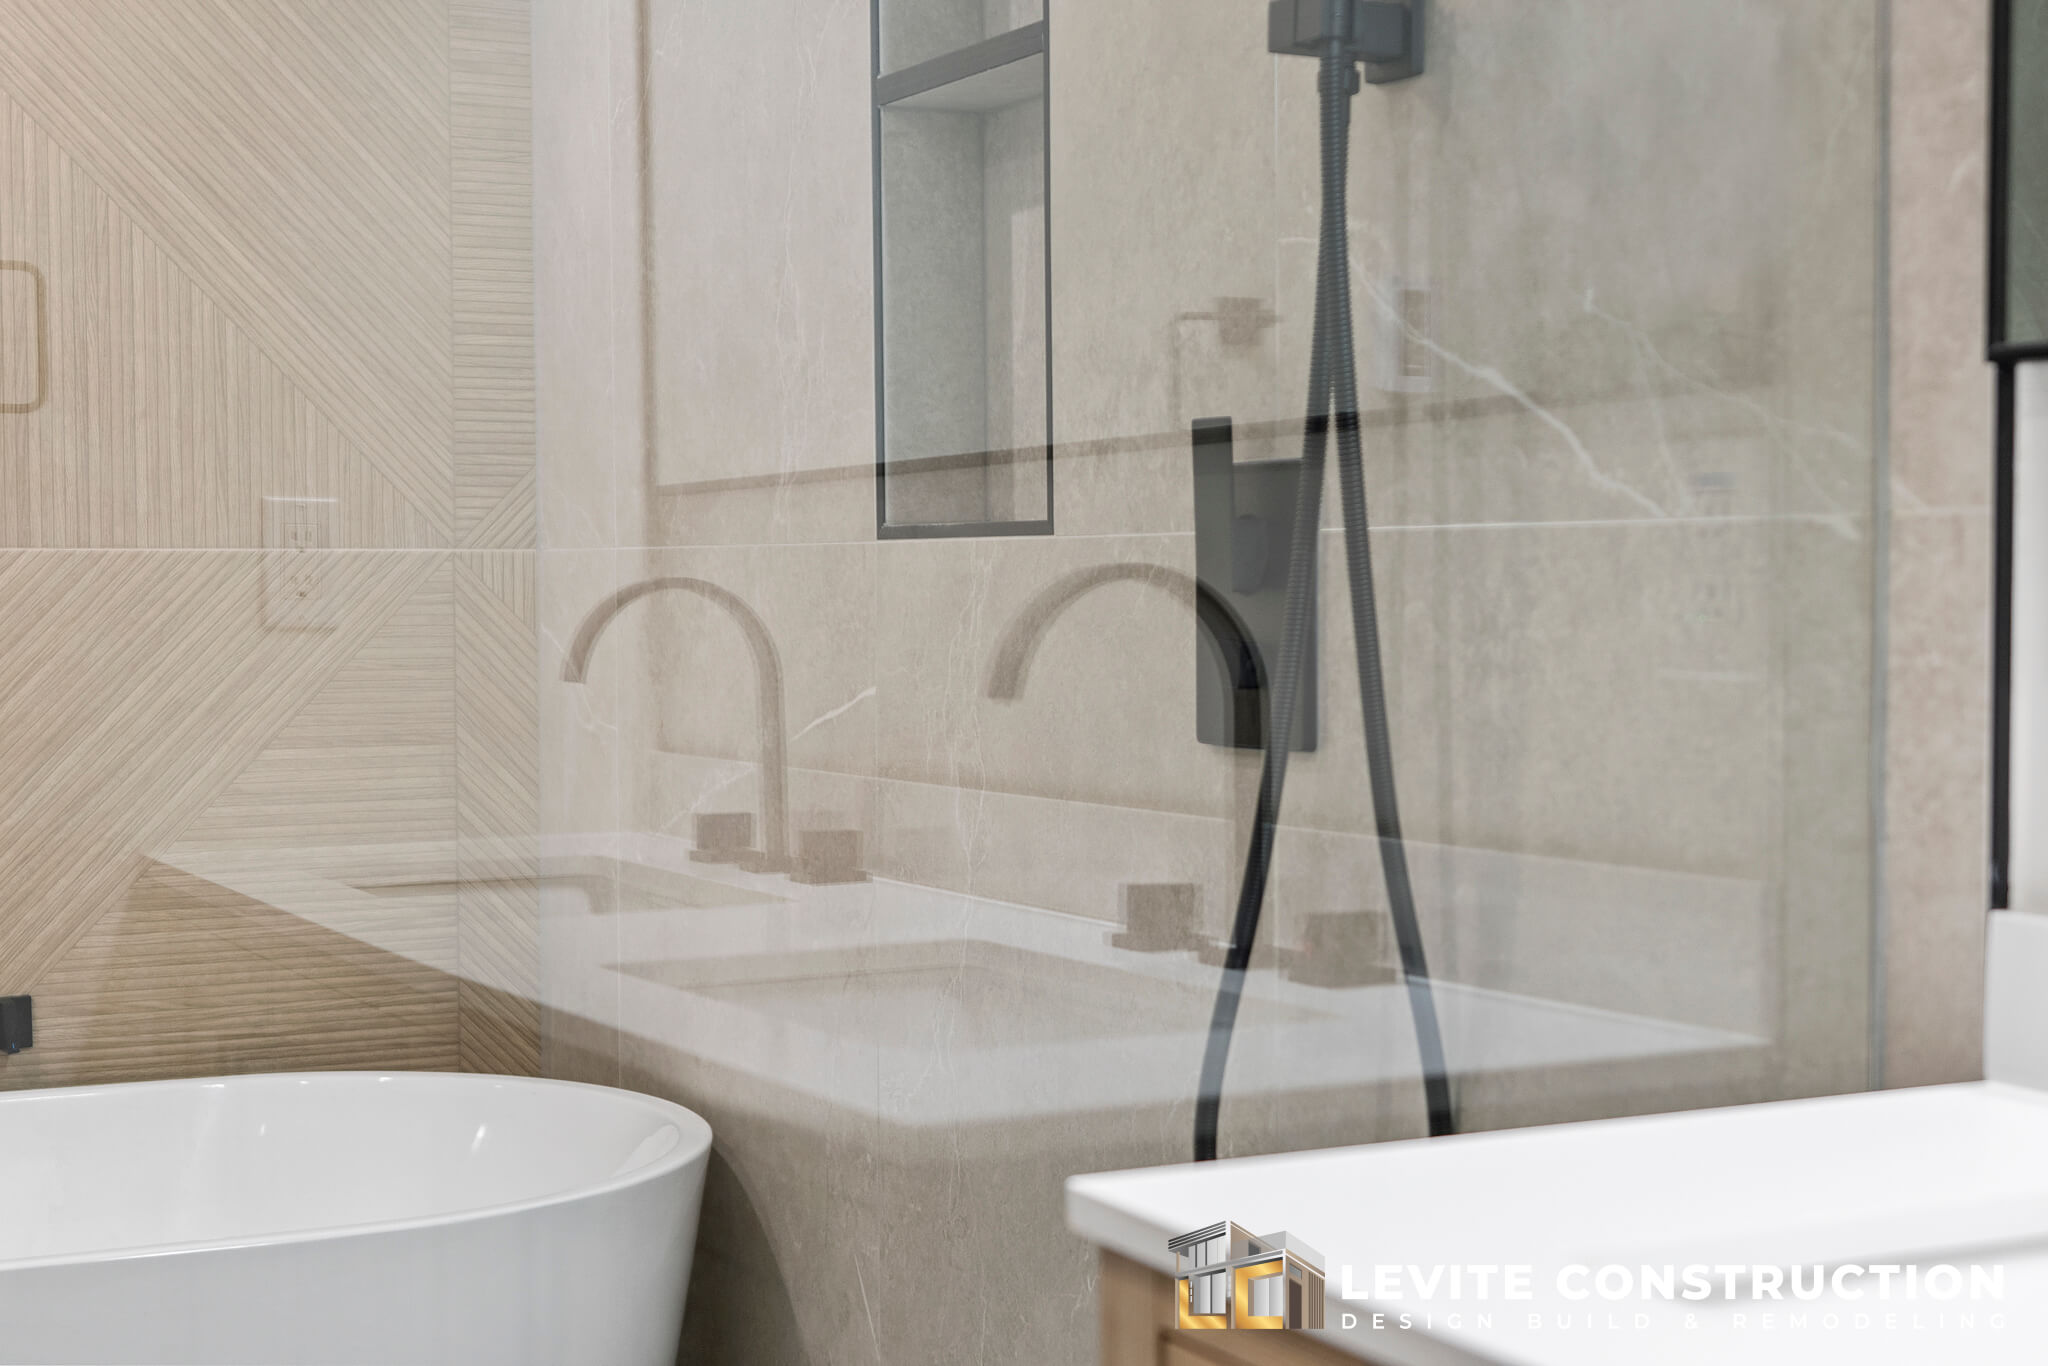 Levite Construction Bathroom Remodeling in Seattle